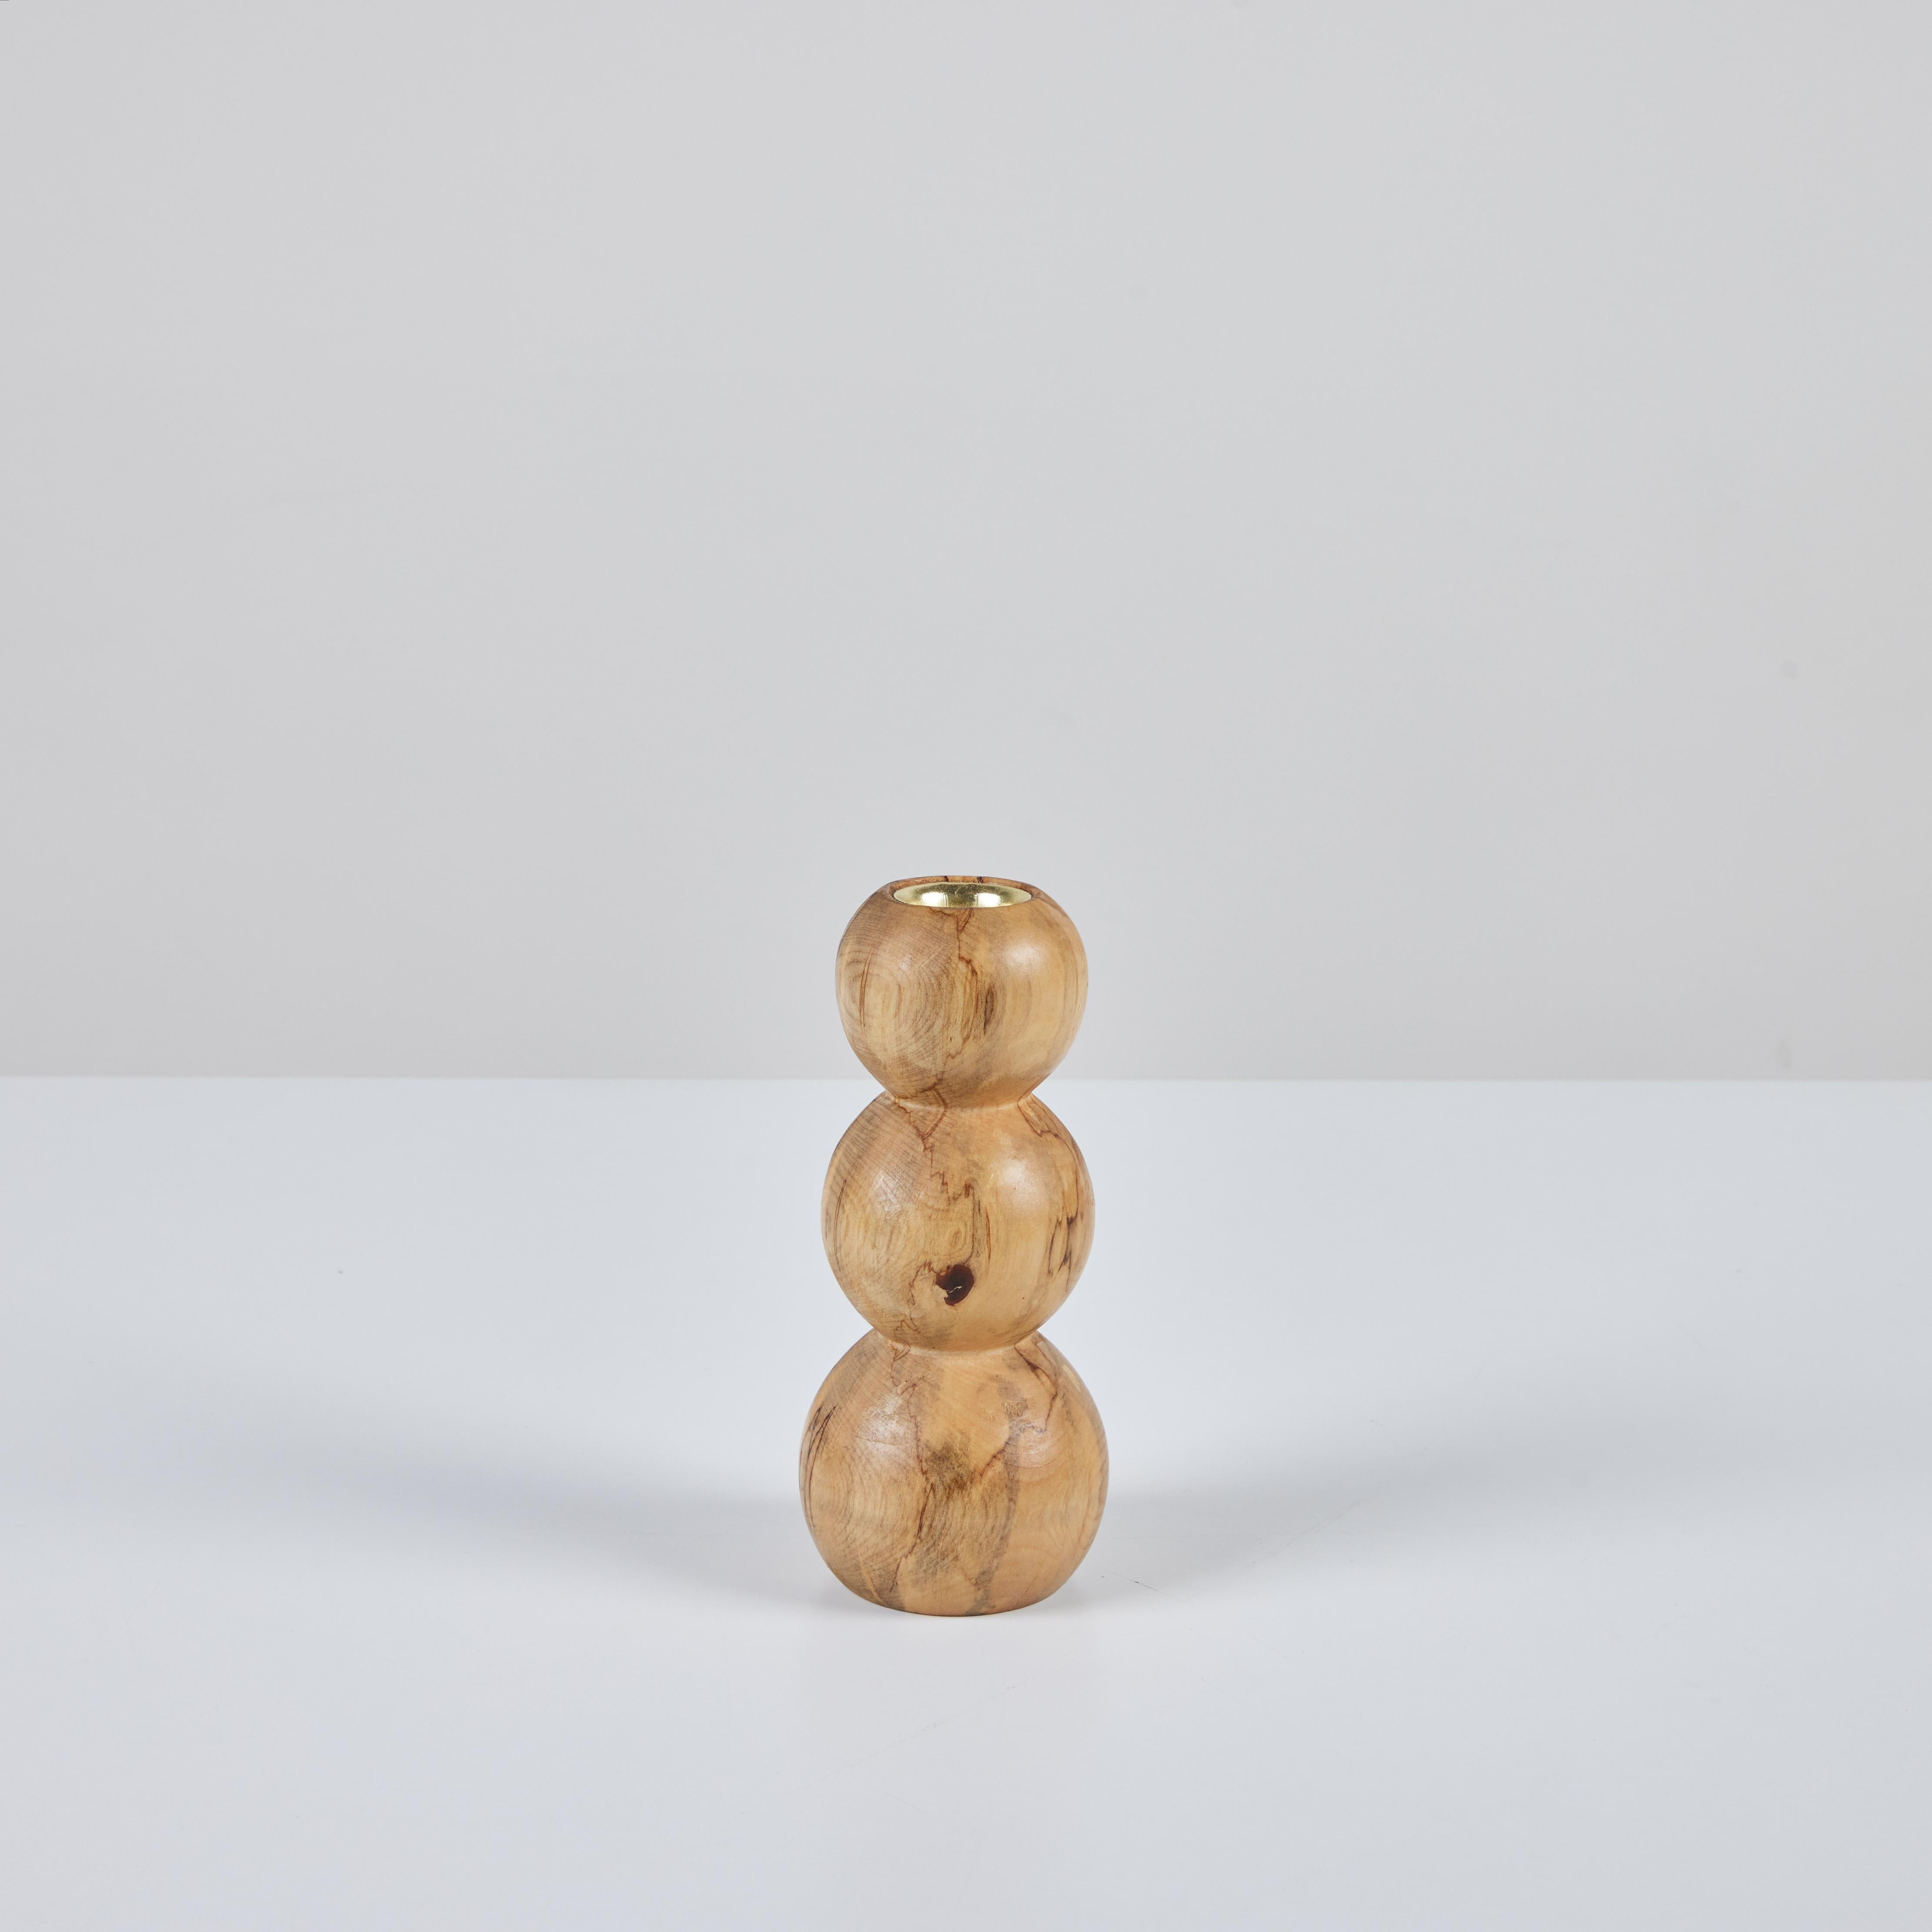 Hand Turned Spalted Birch Bubble Candlestick Holder by Evan Segota In Excellent Condition For Sale In Los Angeles, CA